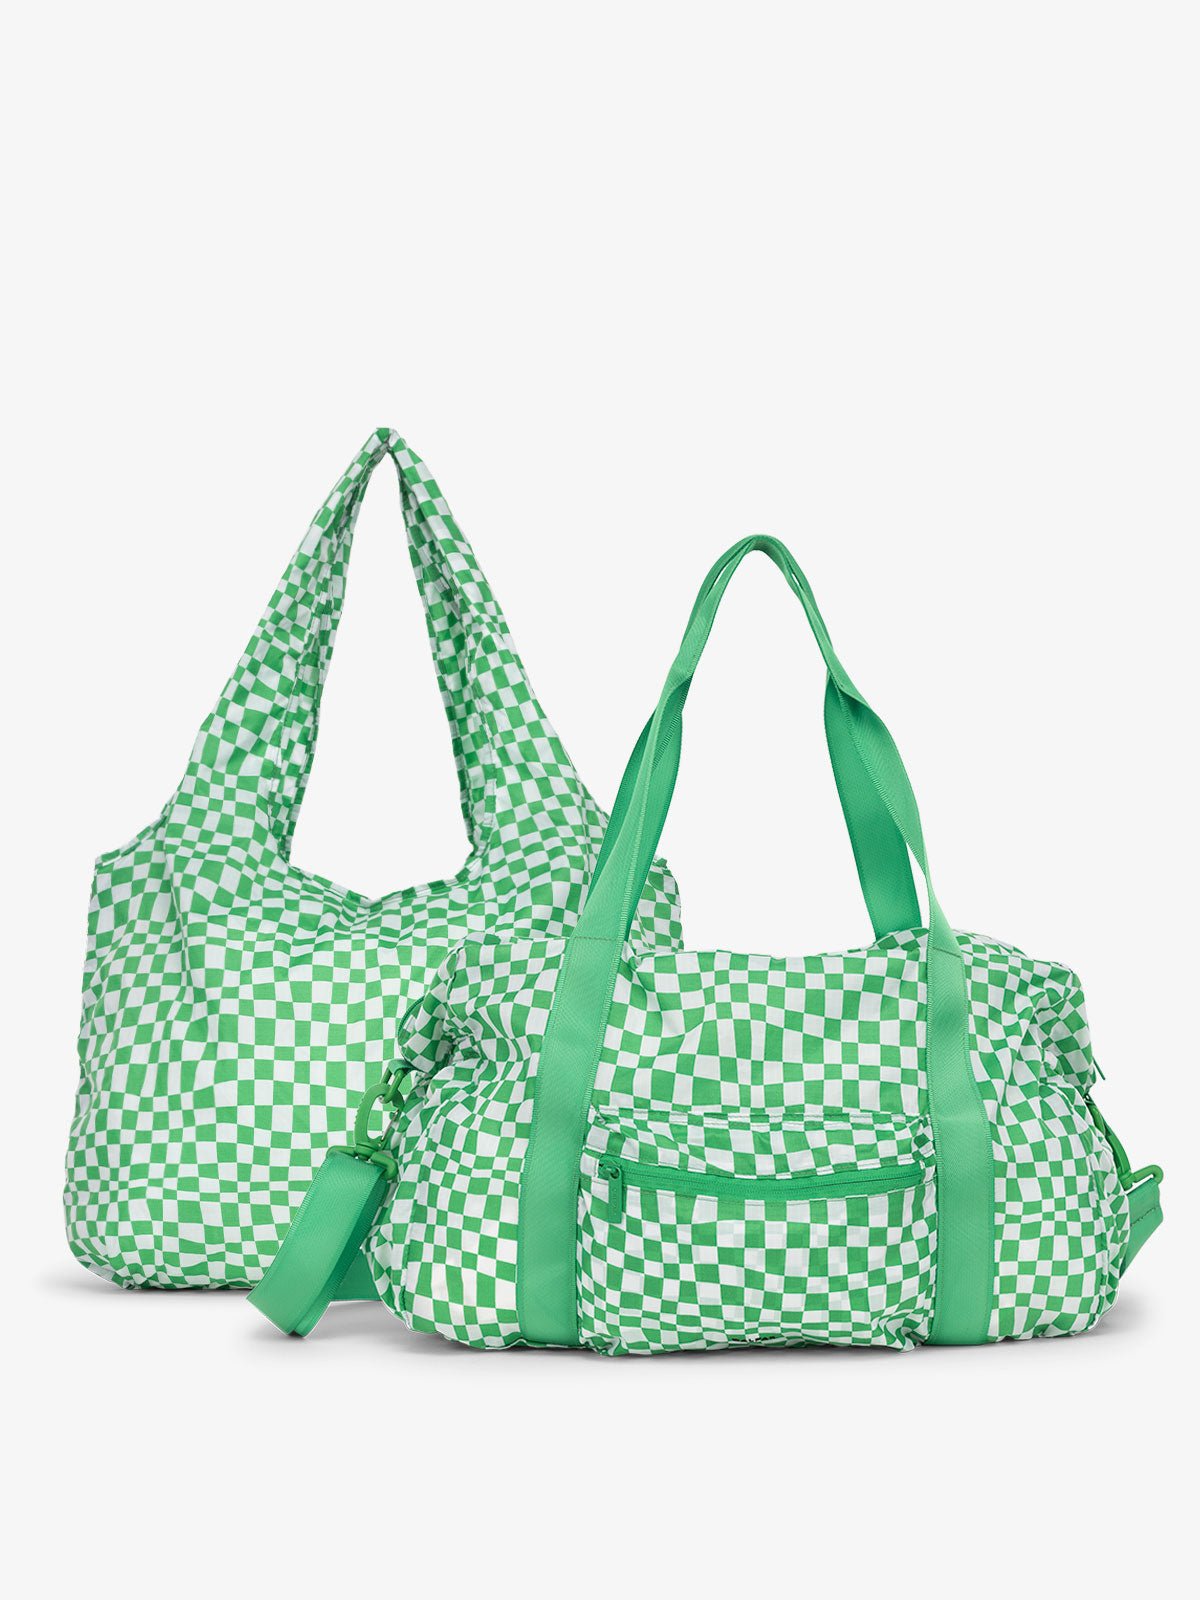 CALPAK Compakt Duo with tote bag and duffel bag in green checkerboard